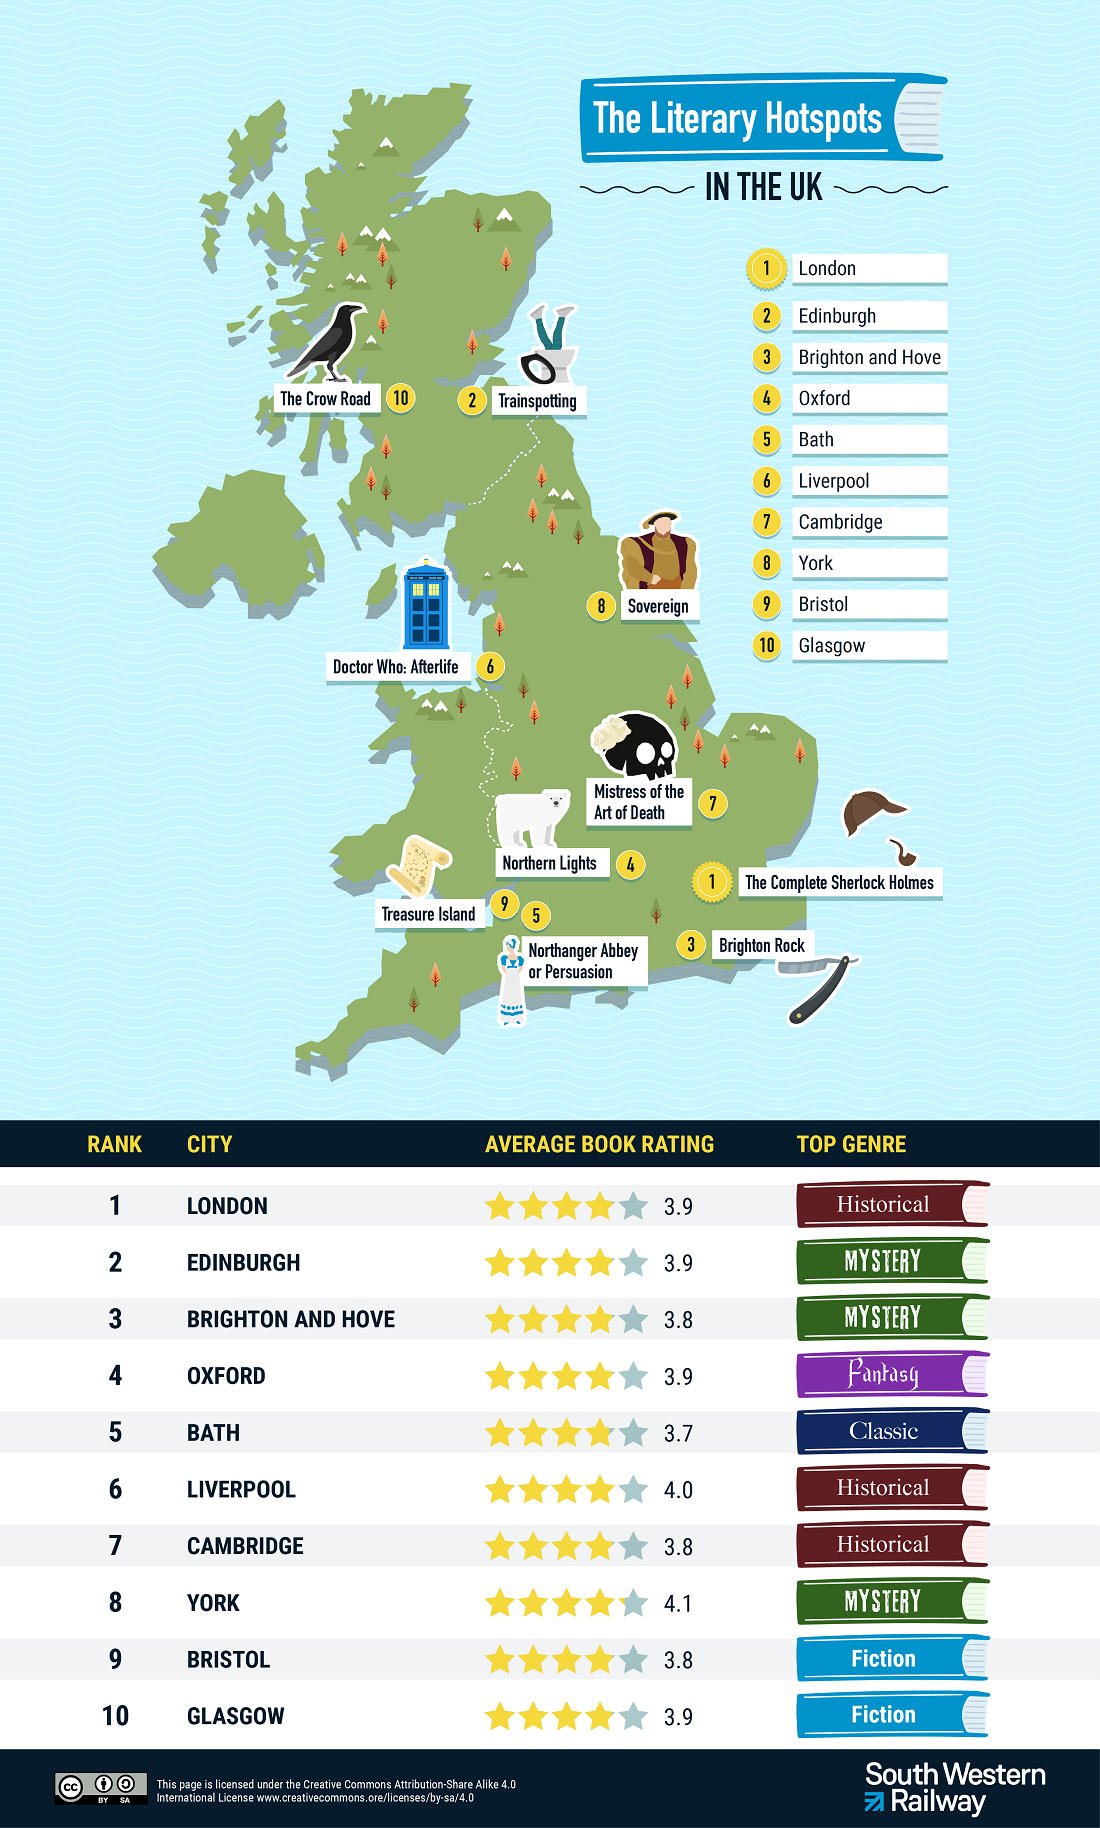 Discover the UK's top ten literary hotspots with SWR